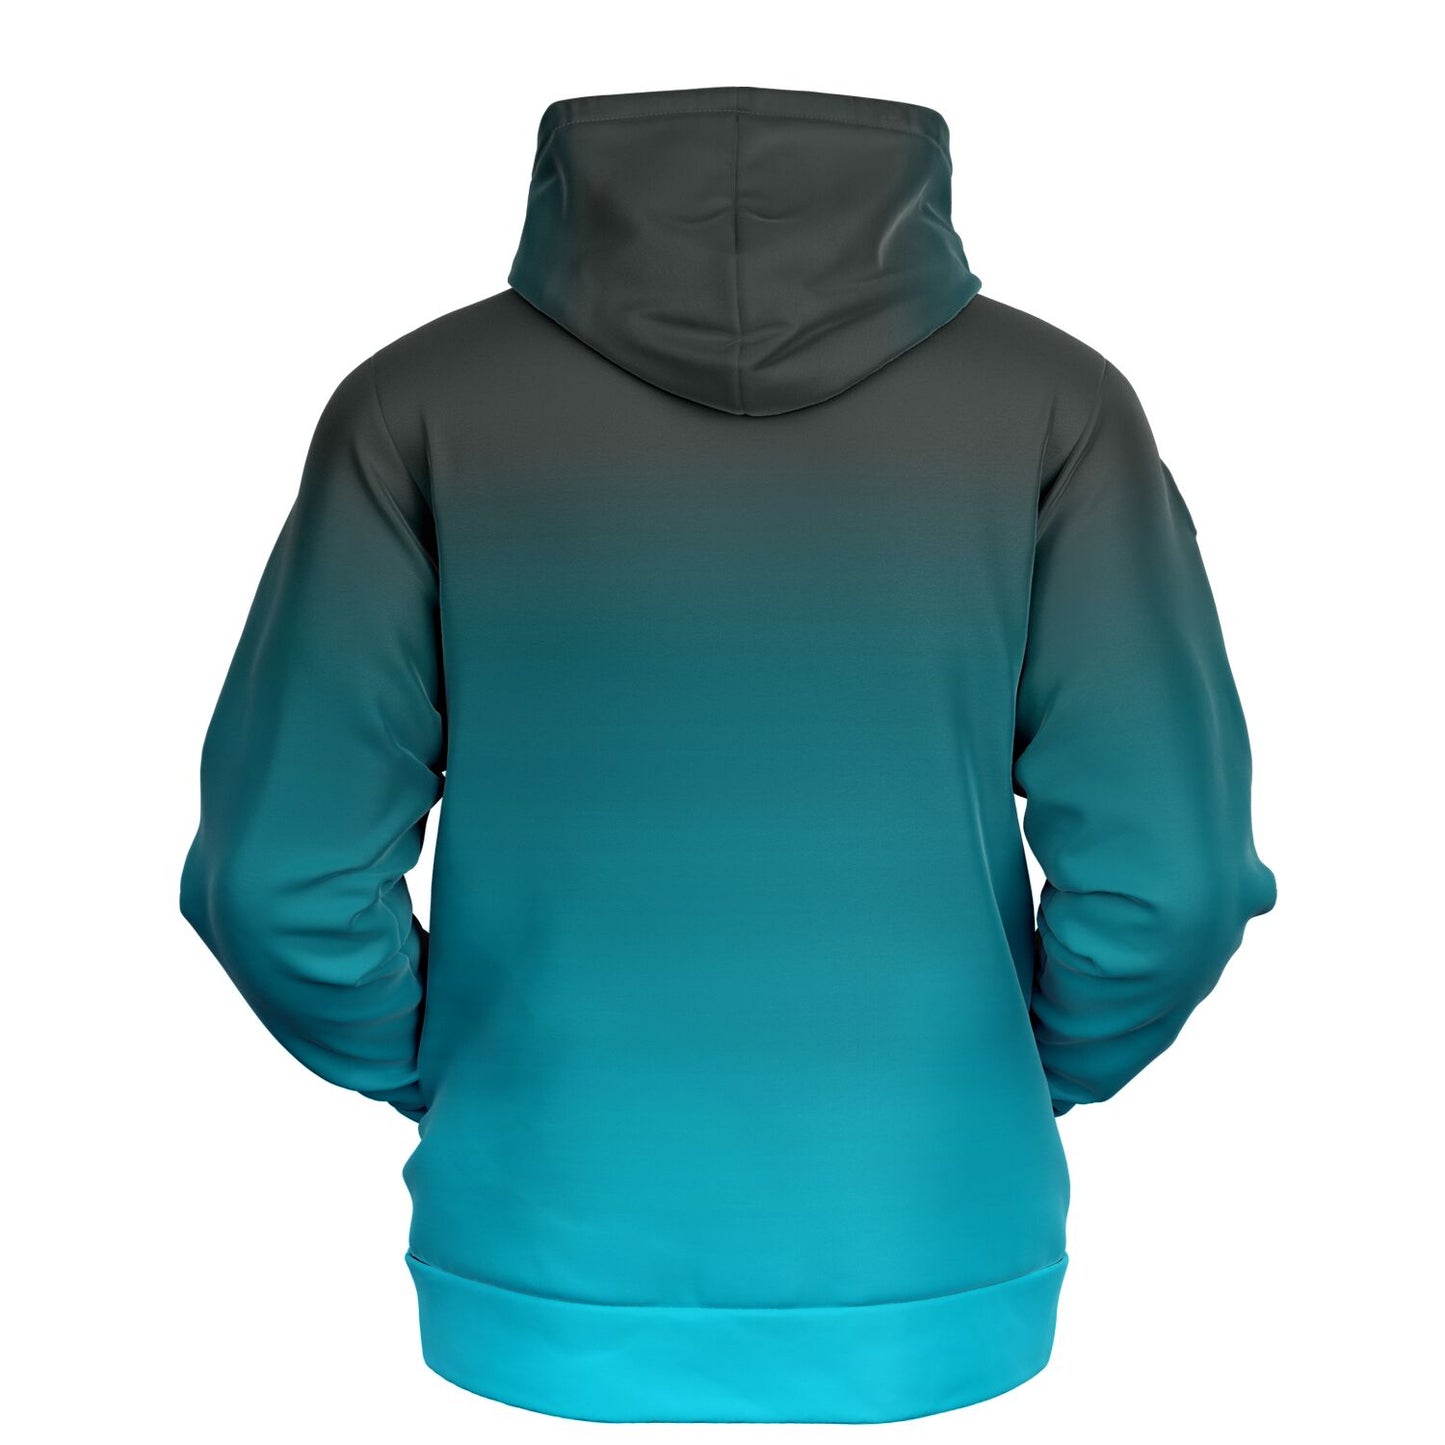 Blue Green Ombre Hoodie, Gradient Teal Aqua Tie Dye Pullover Men Women Adult Aesthetic Graphic Cotton Hooded Sweatshirt with Pockets